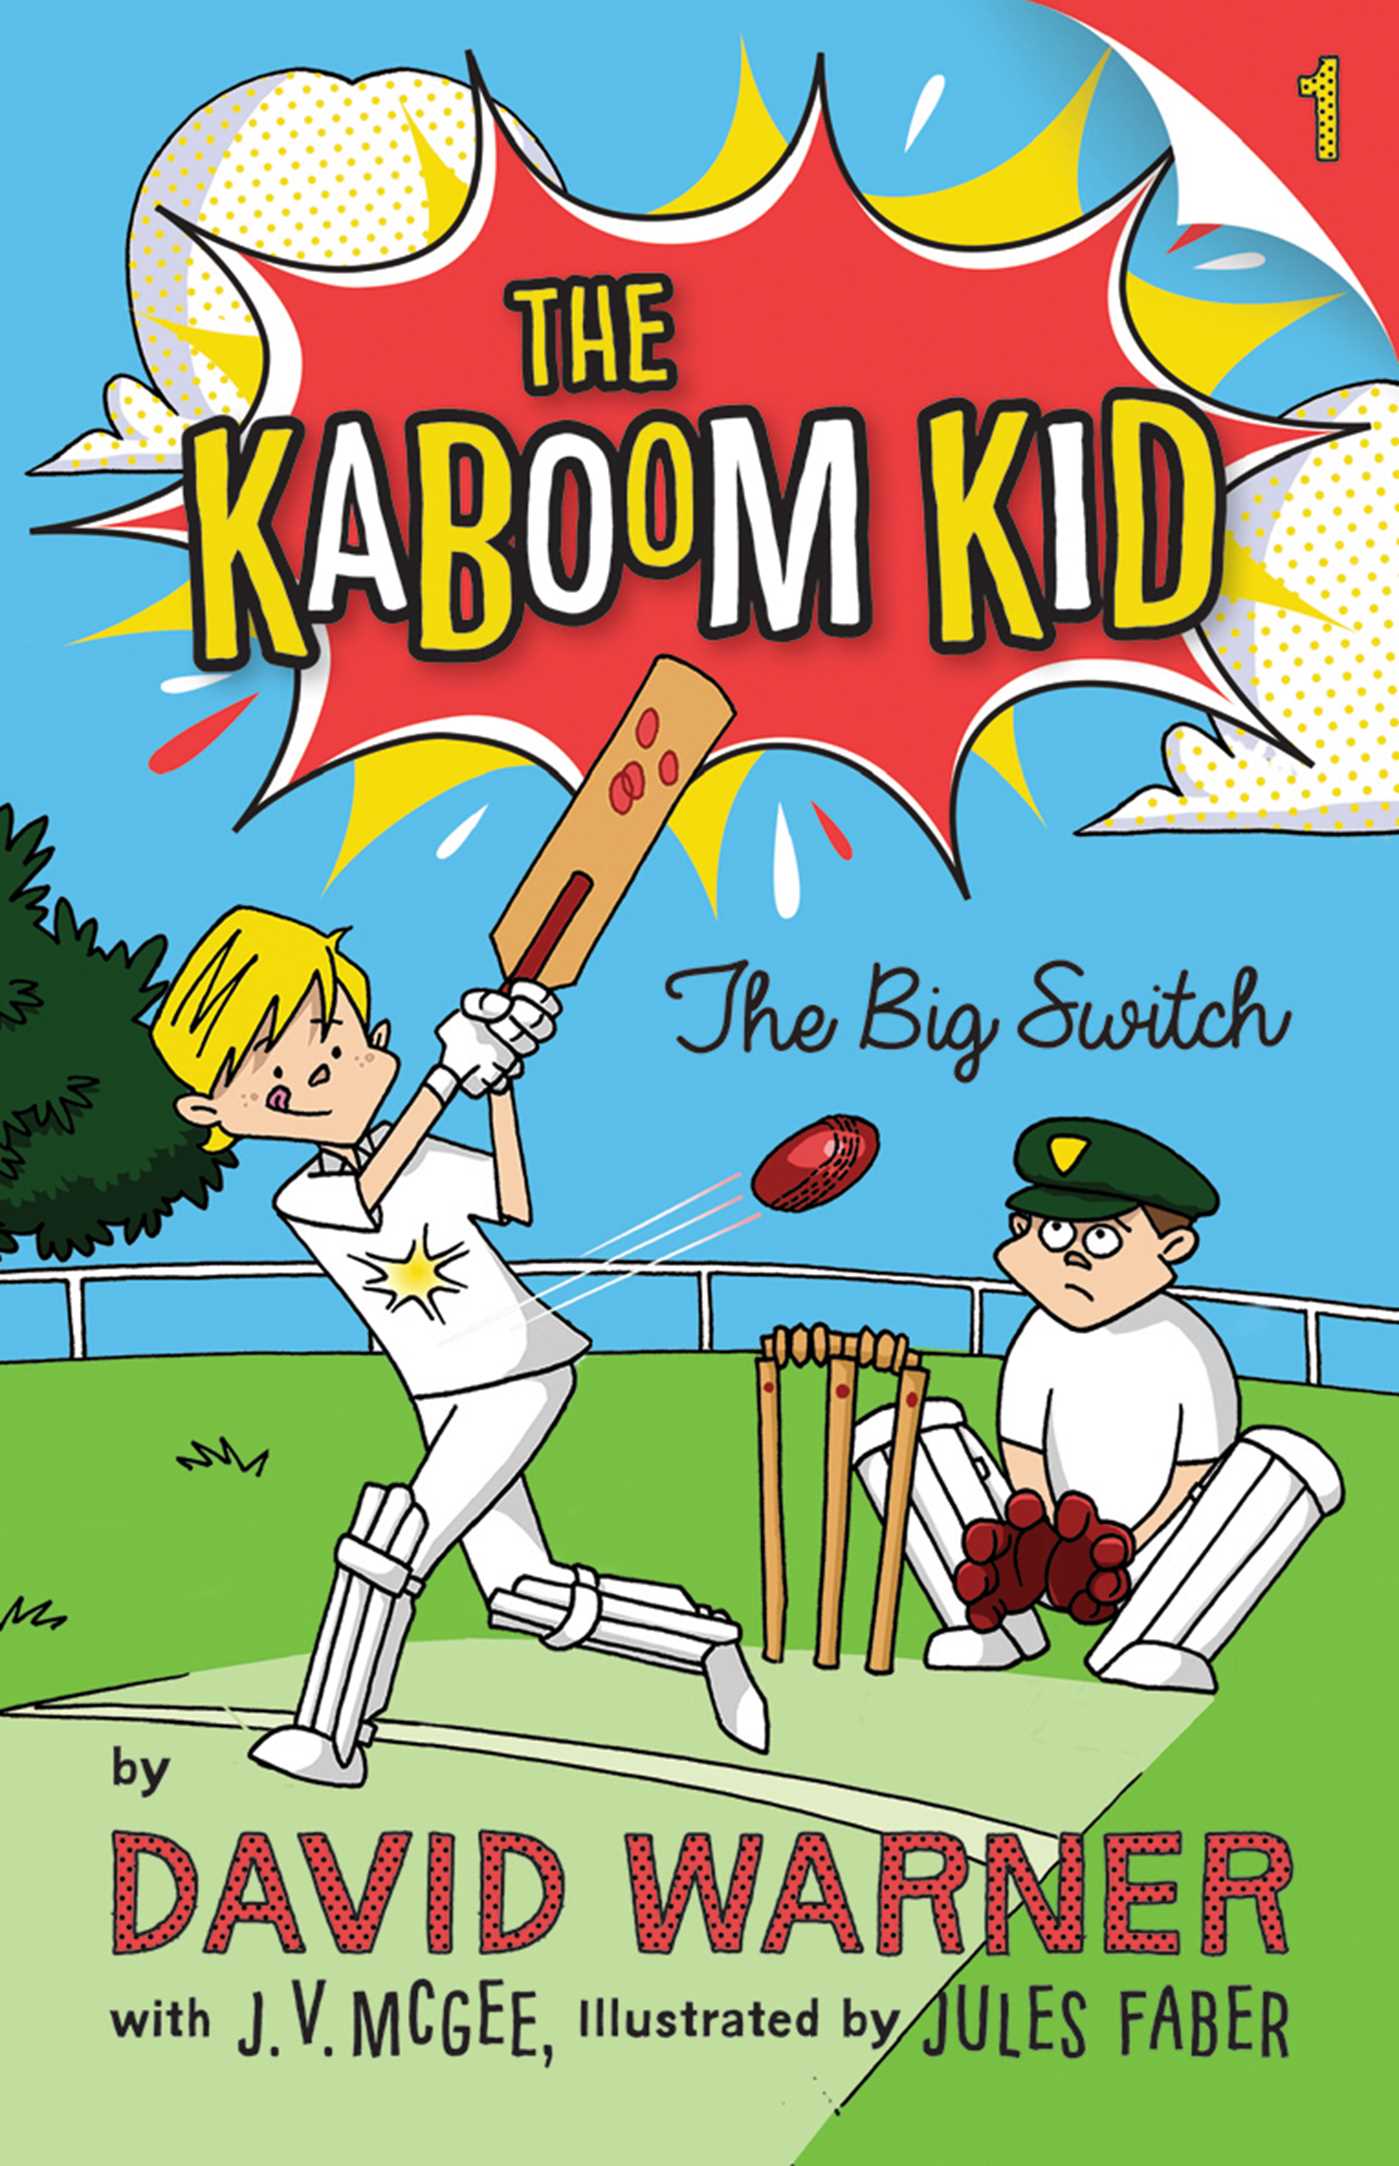 Books about sport, animal characters and fresh reading recommendations for 10-12 year olds